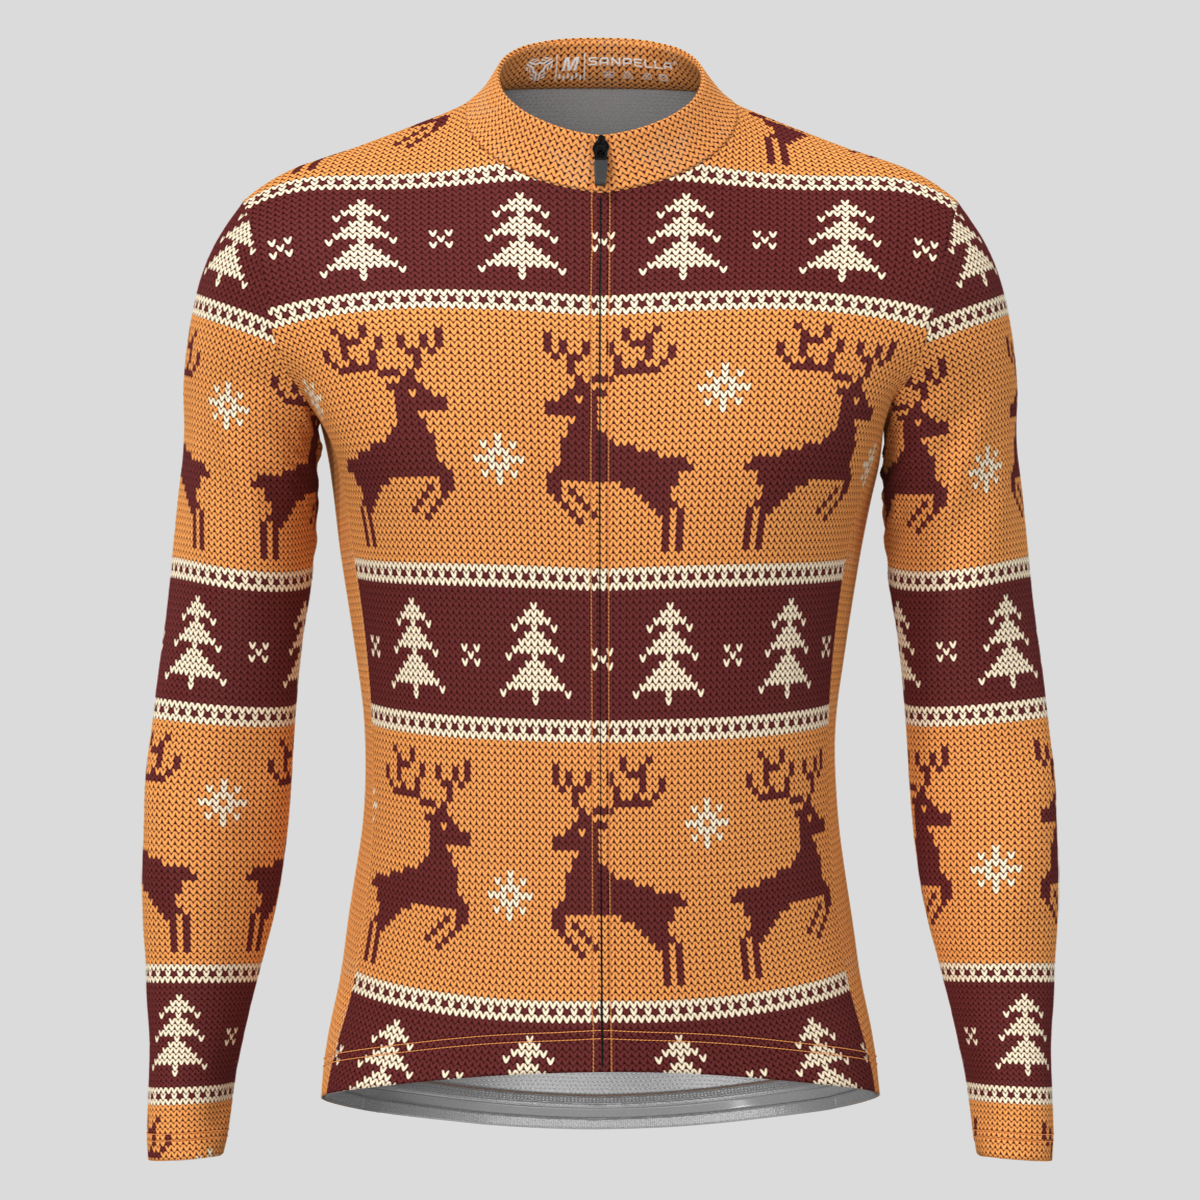 XMAS Ugly Sweater Themed Men's LS Cycling Jersey - Brown